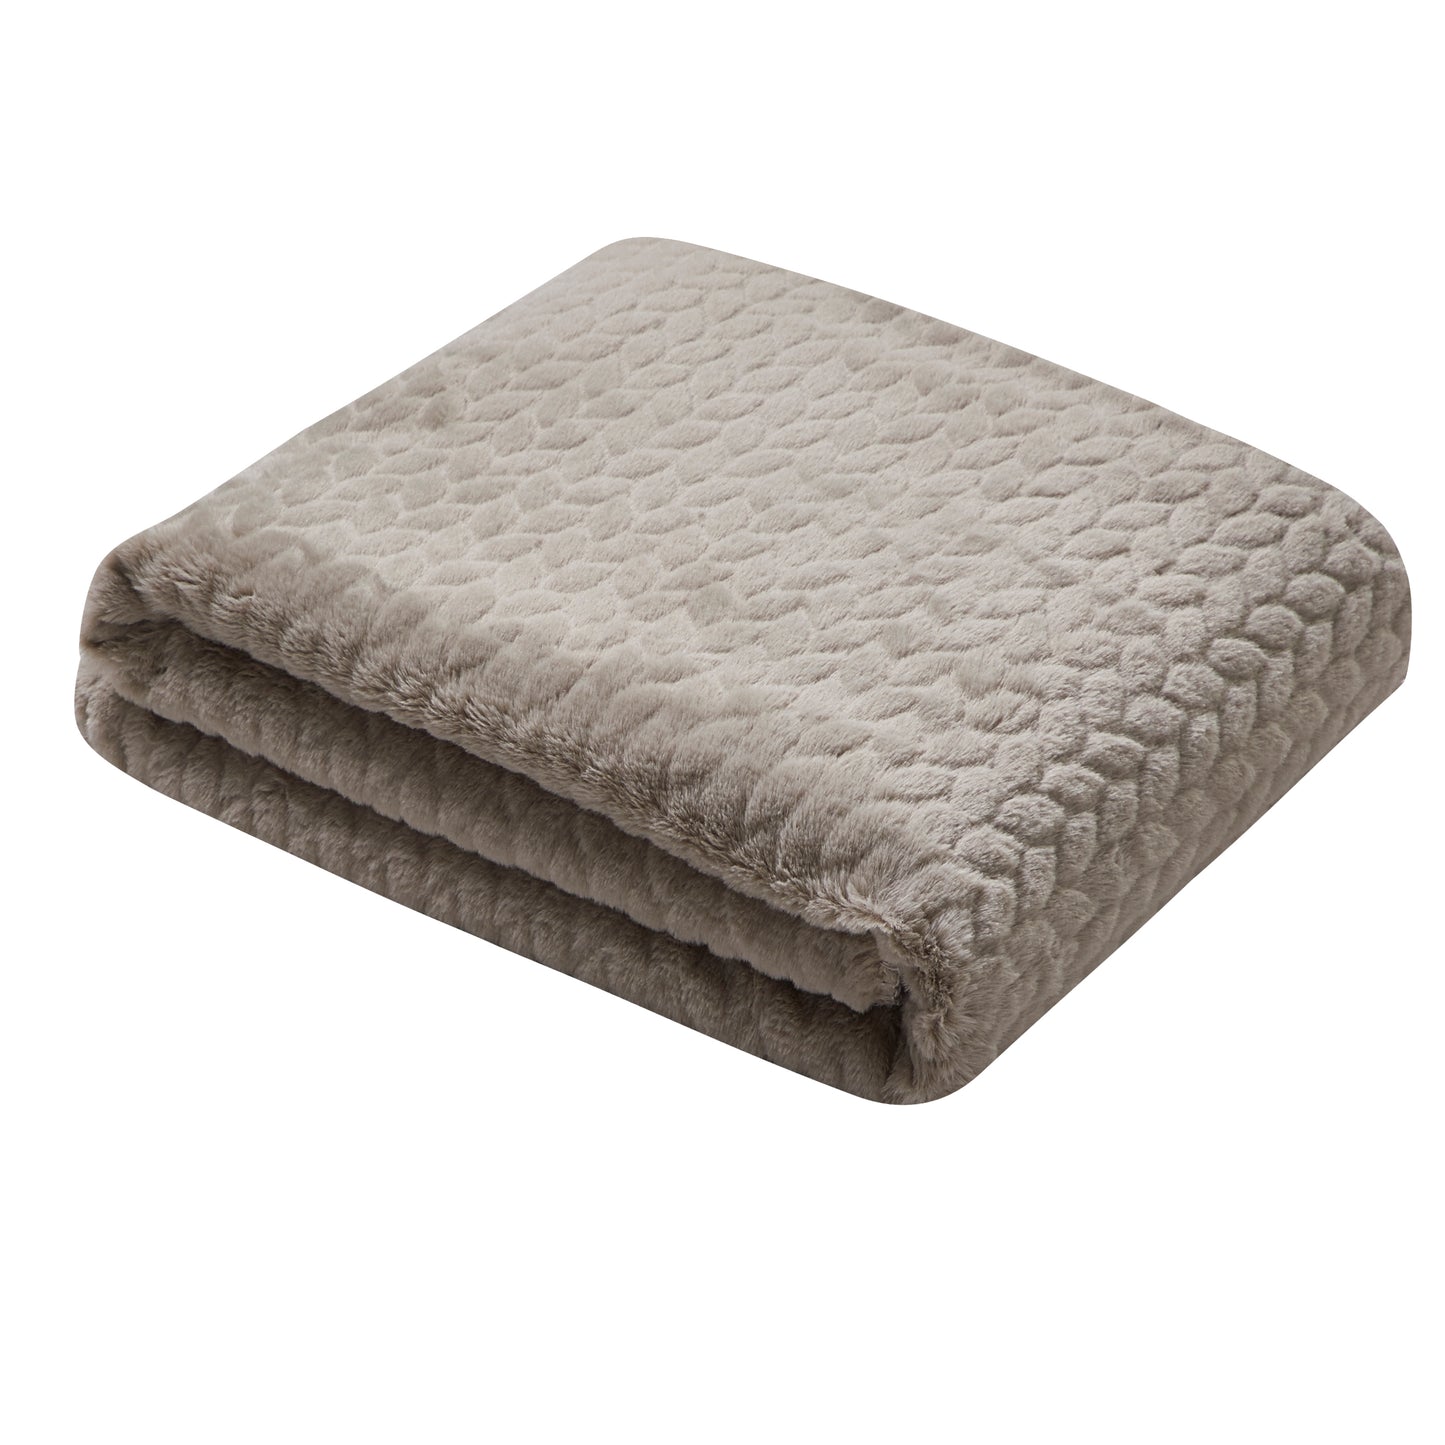 Etched Faux Fur Berber Throw - Taupe